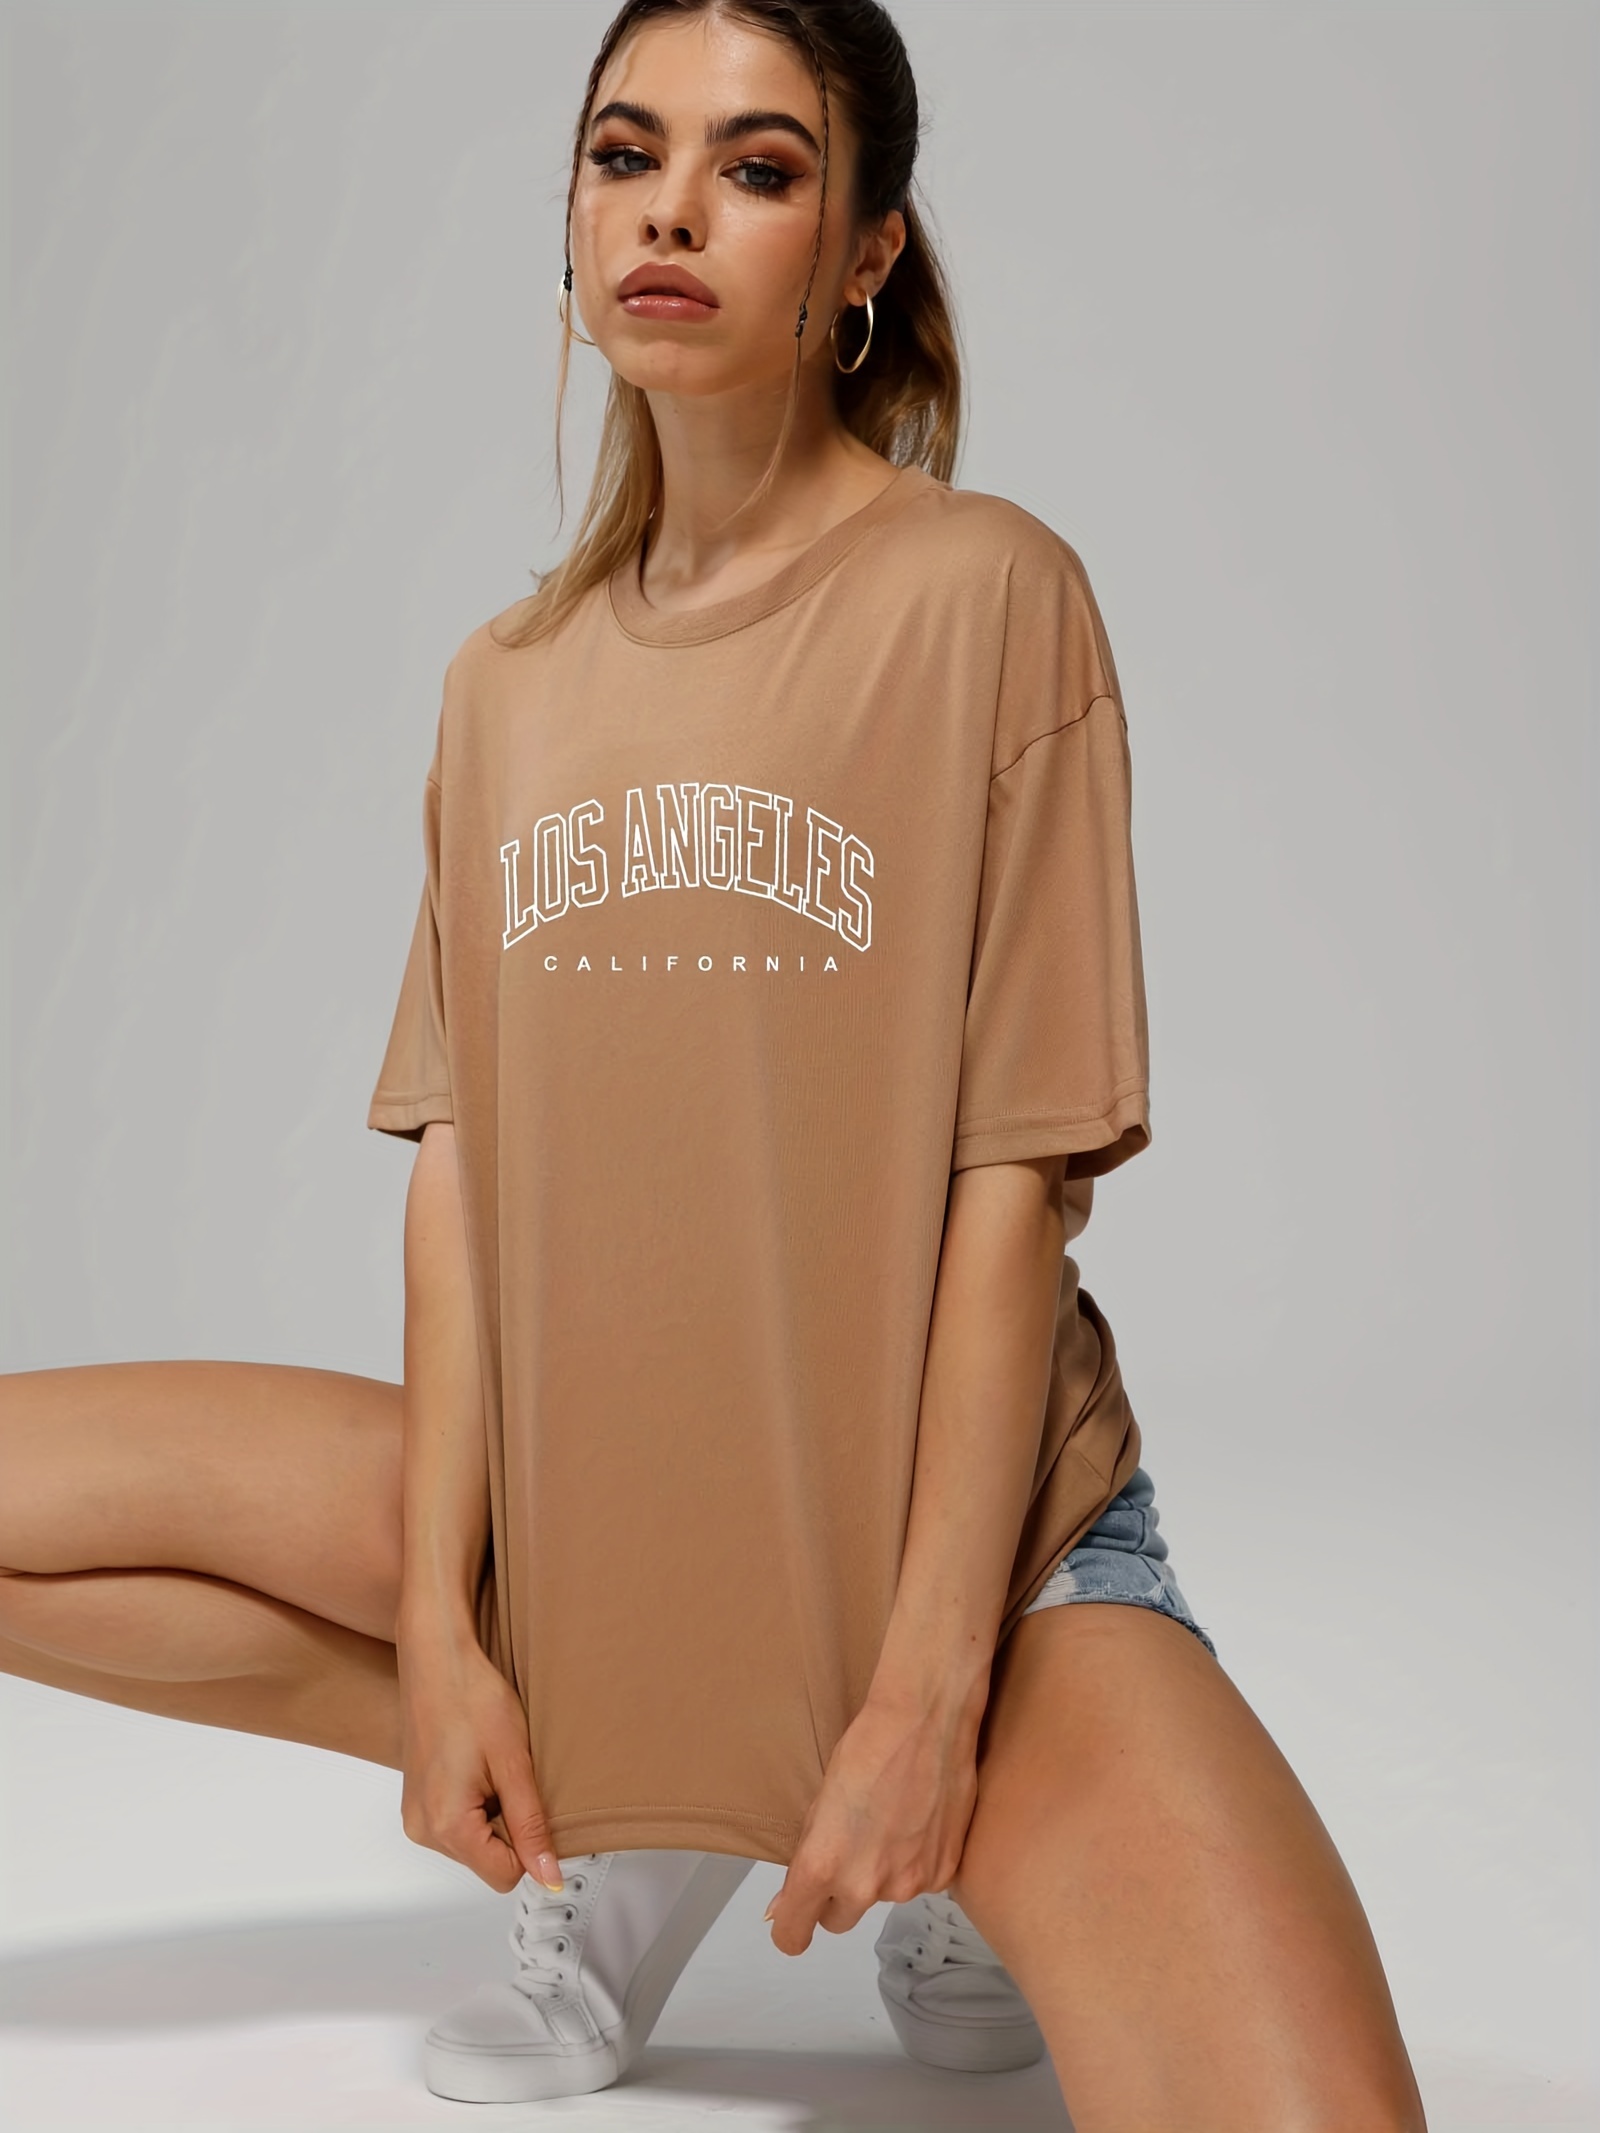 solid color letter print casual sports t shirt soft crew neck short sleeve tee womens clothing details 2